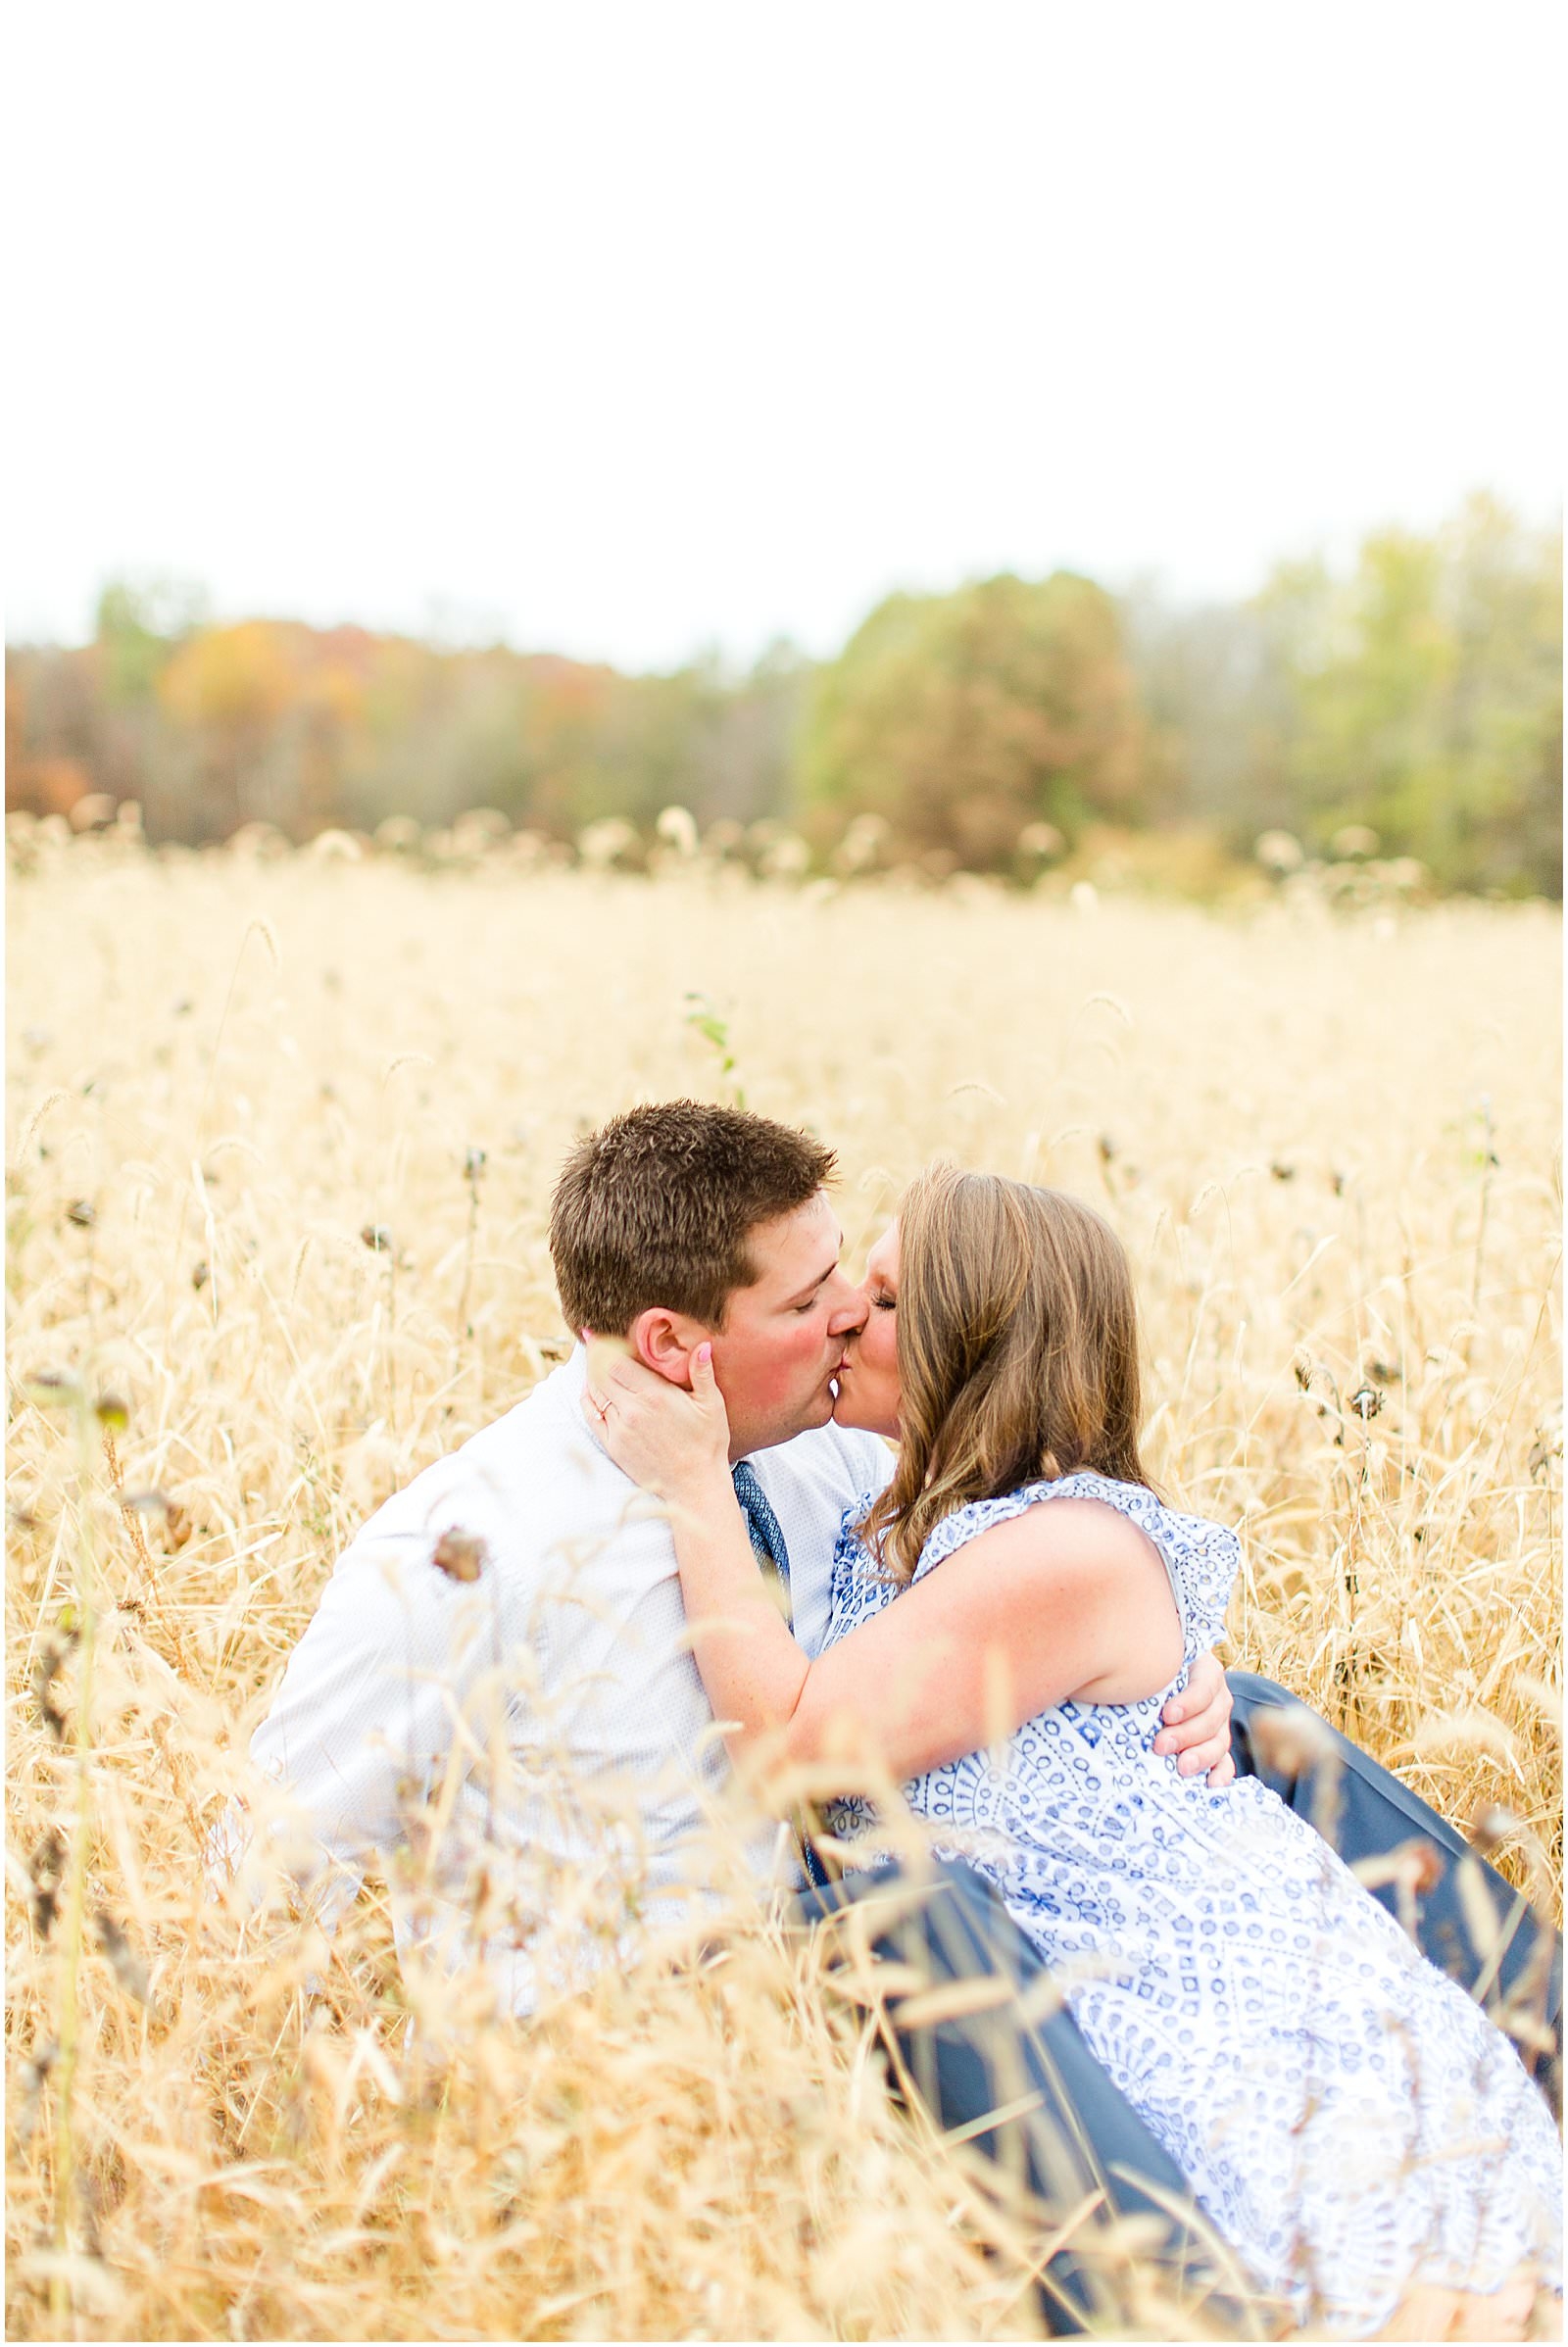 A Southern Illinois Engagement Session | Roxanne and Matthew | Bret and Brandie Photography 0030.jpg